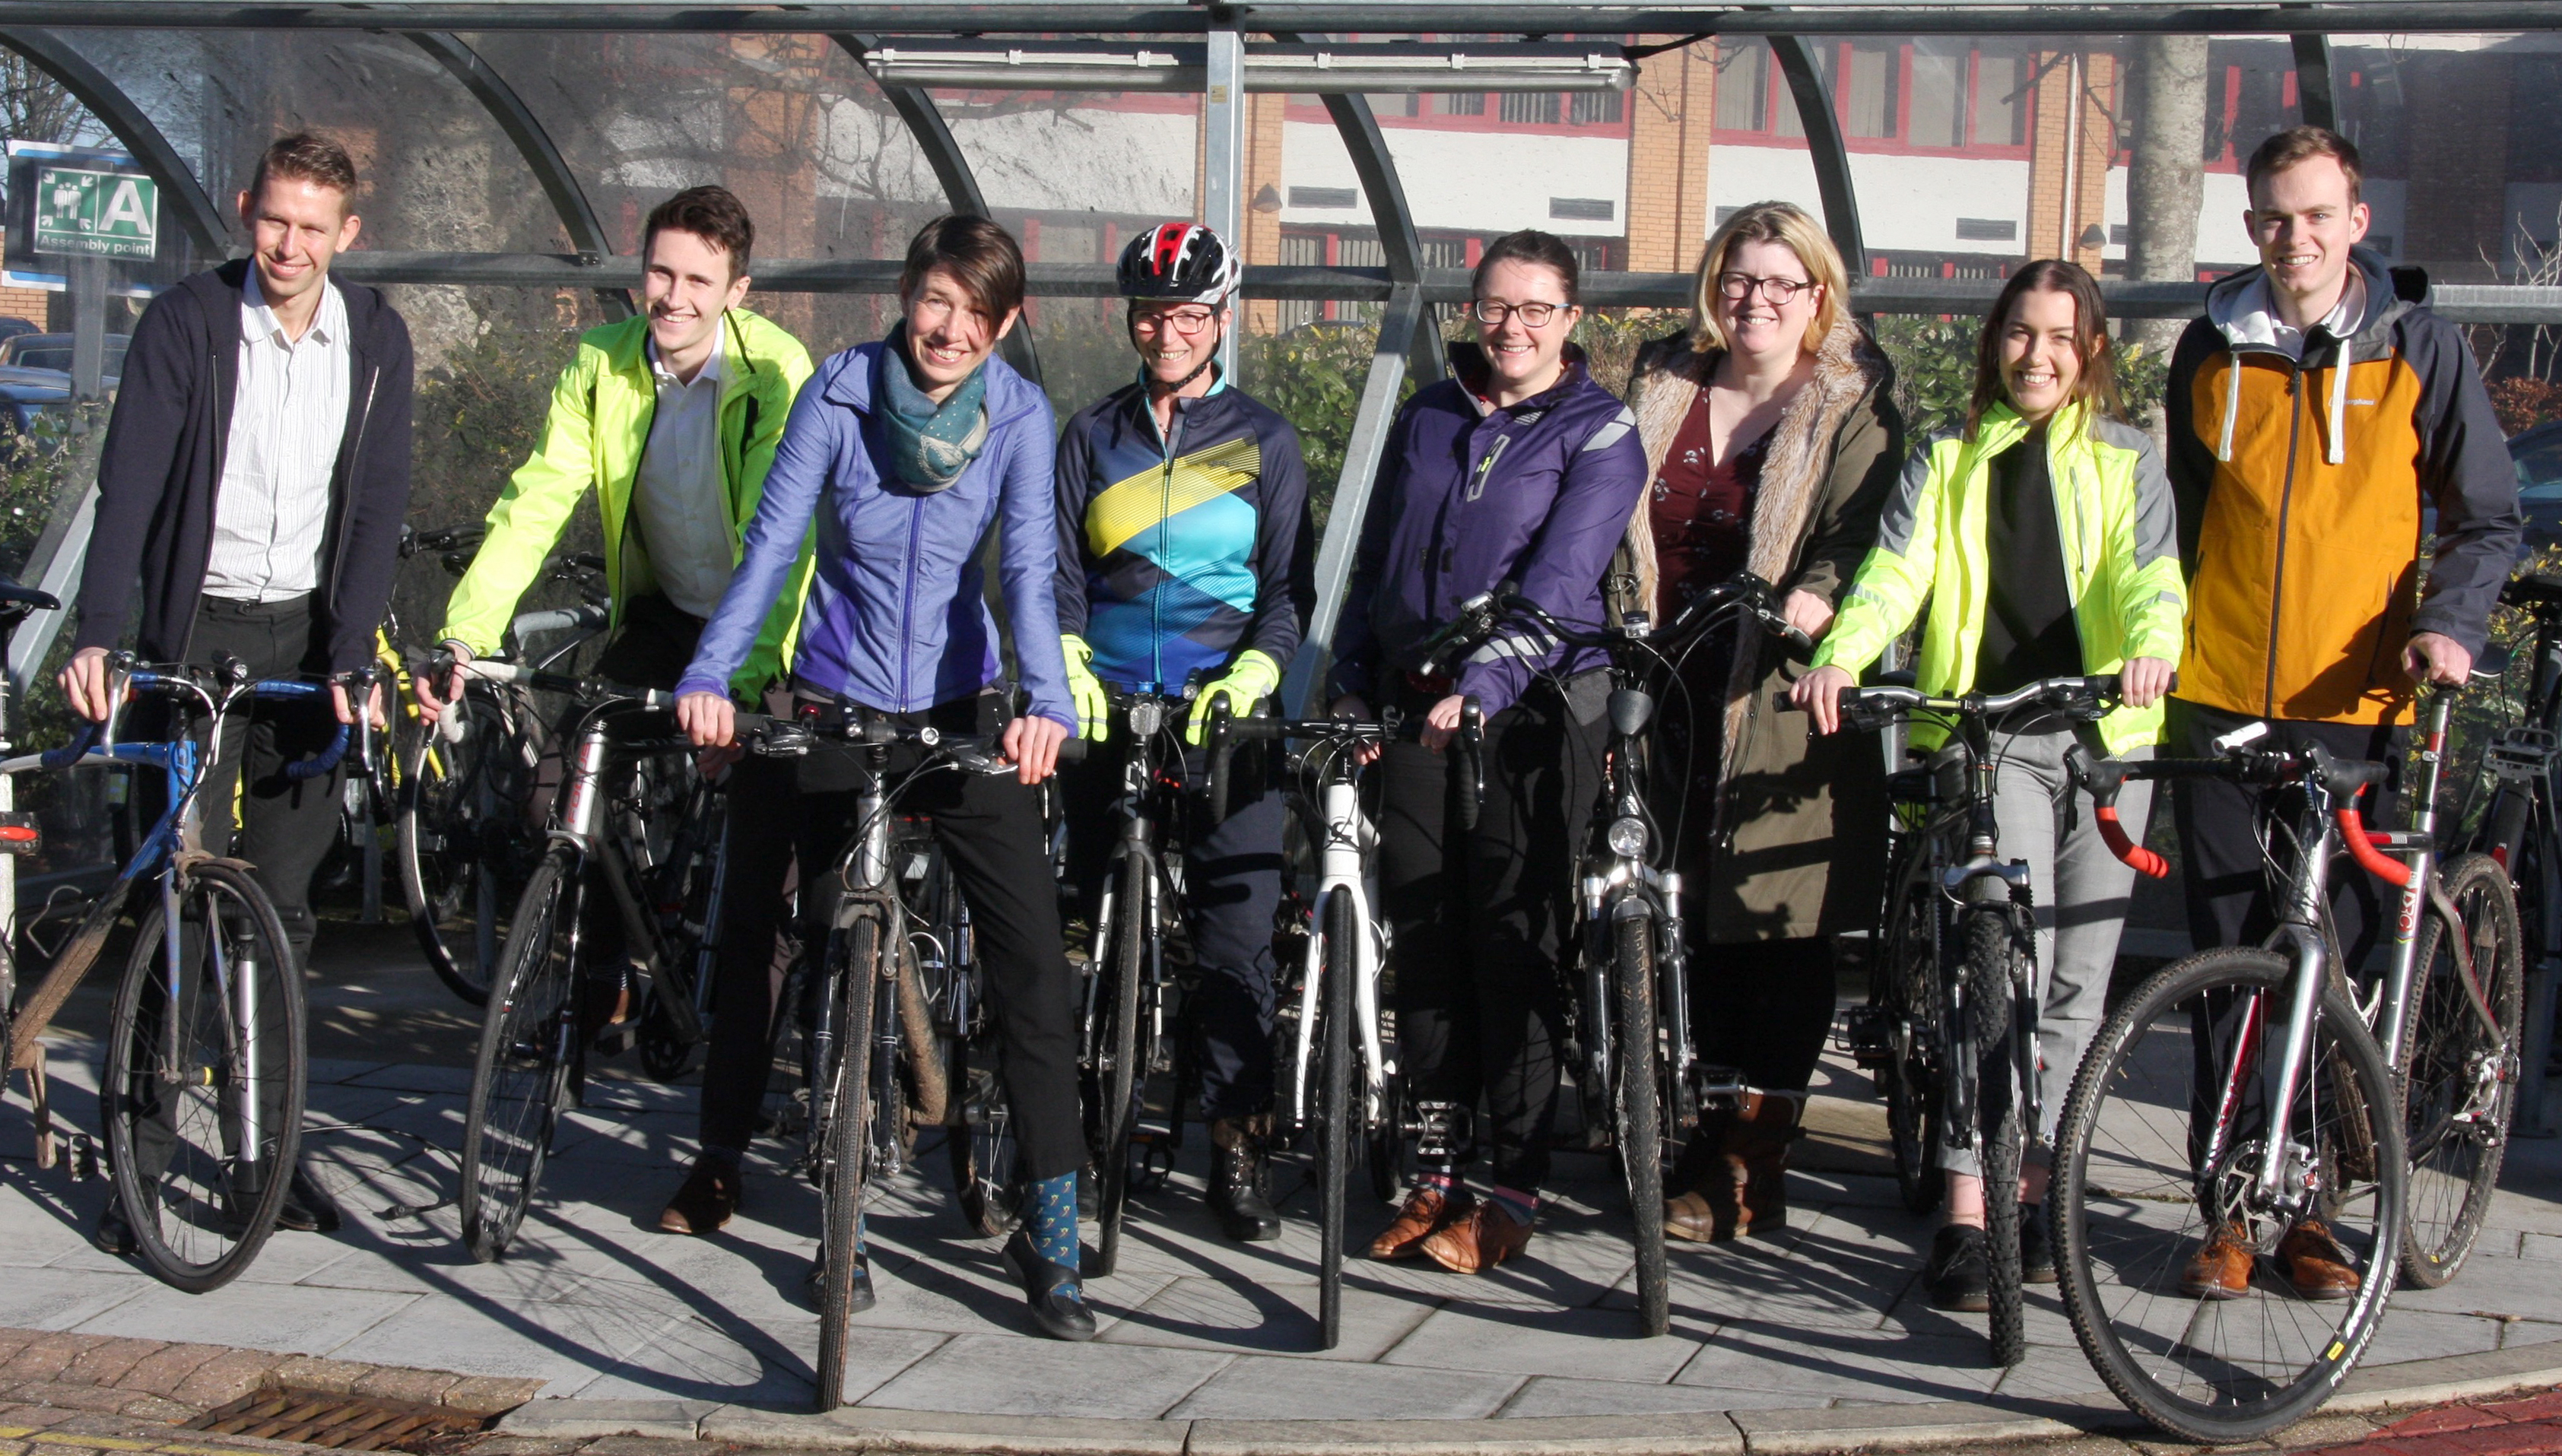 OfS employees' cycle club